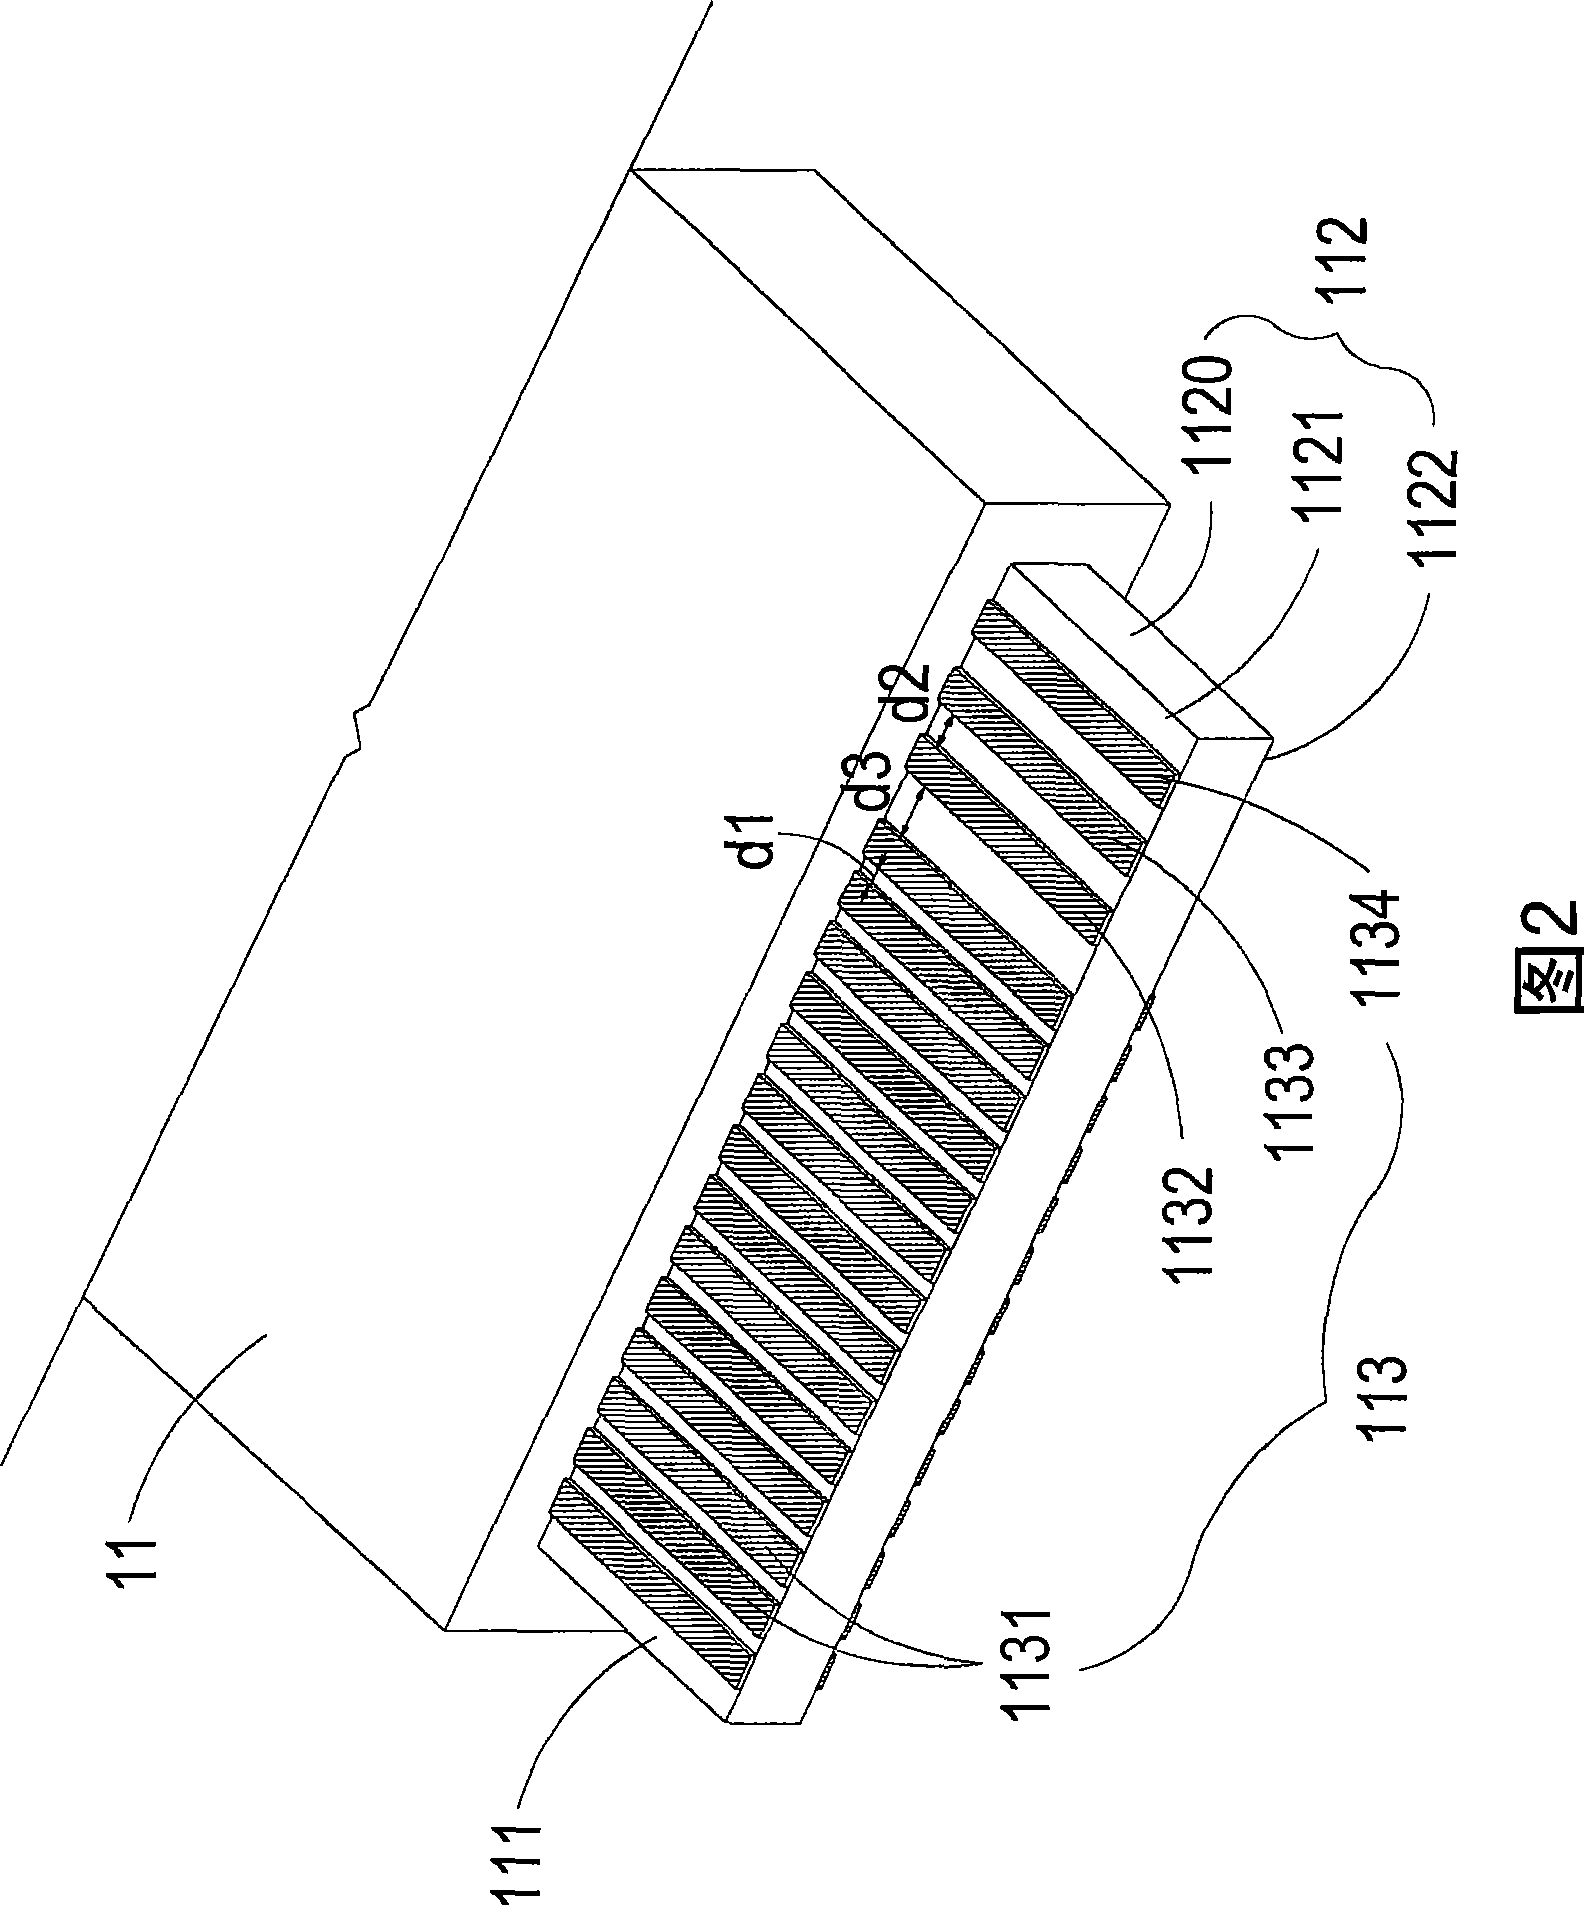 Electronic device with electric power connection interface